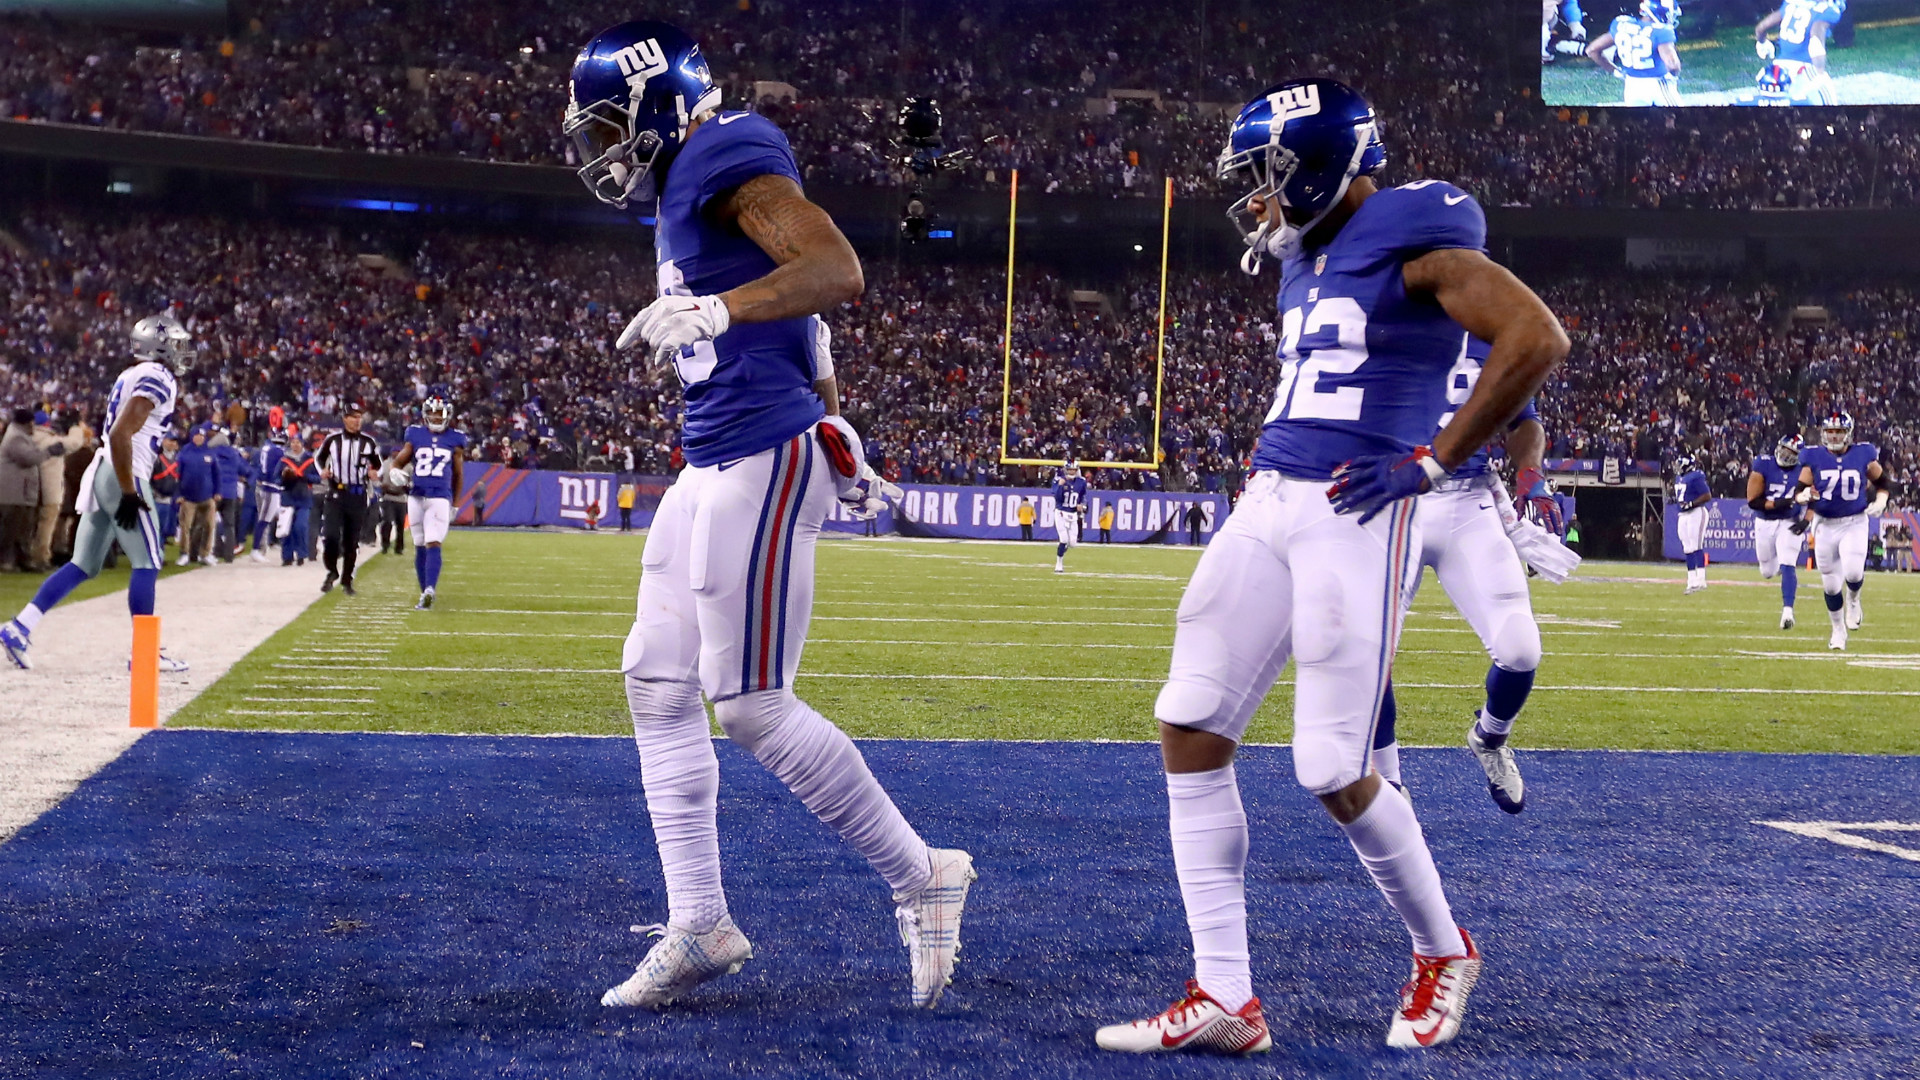 After a 61 yard touchdown, OBJ channelled his inner Michael Jackson, treating fans